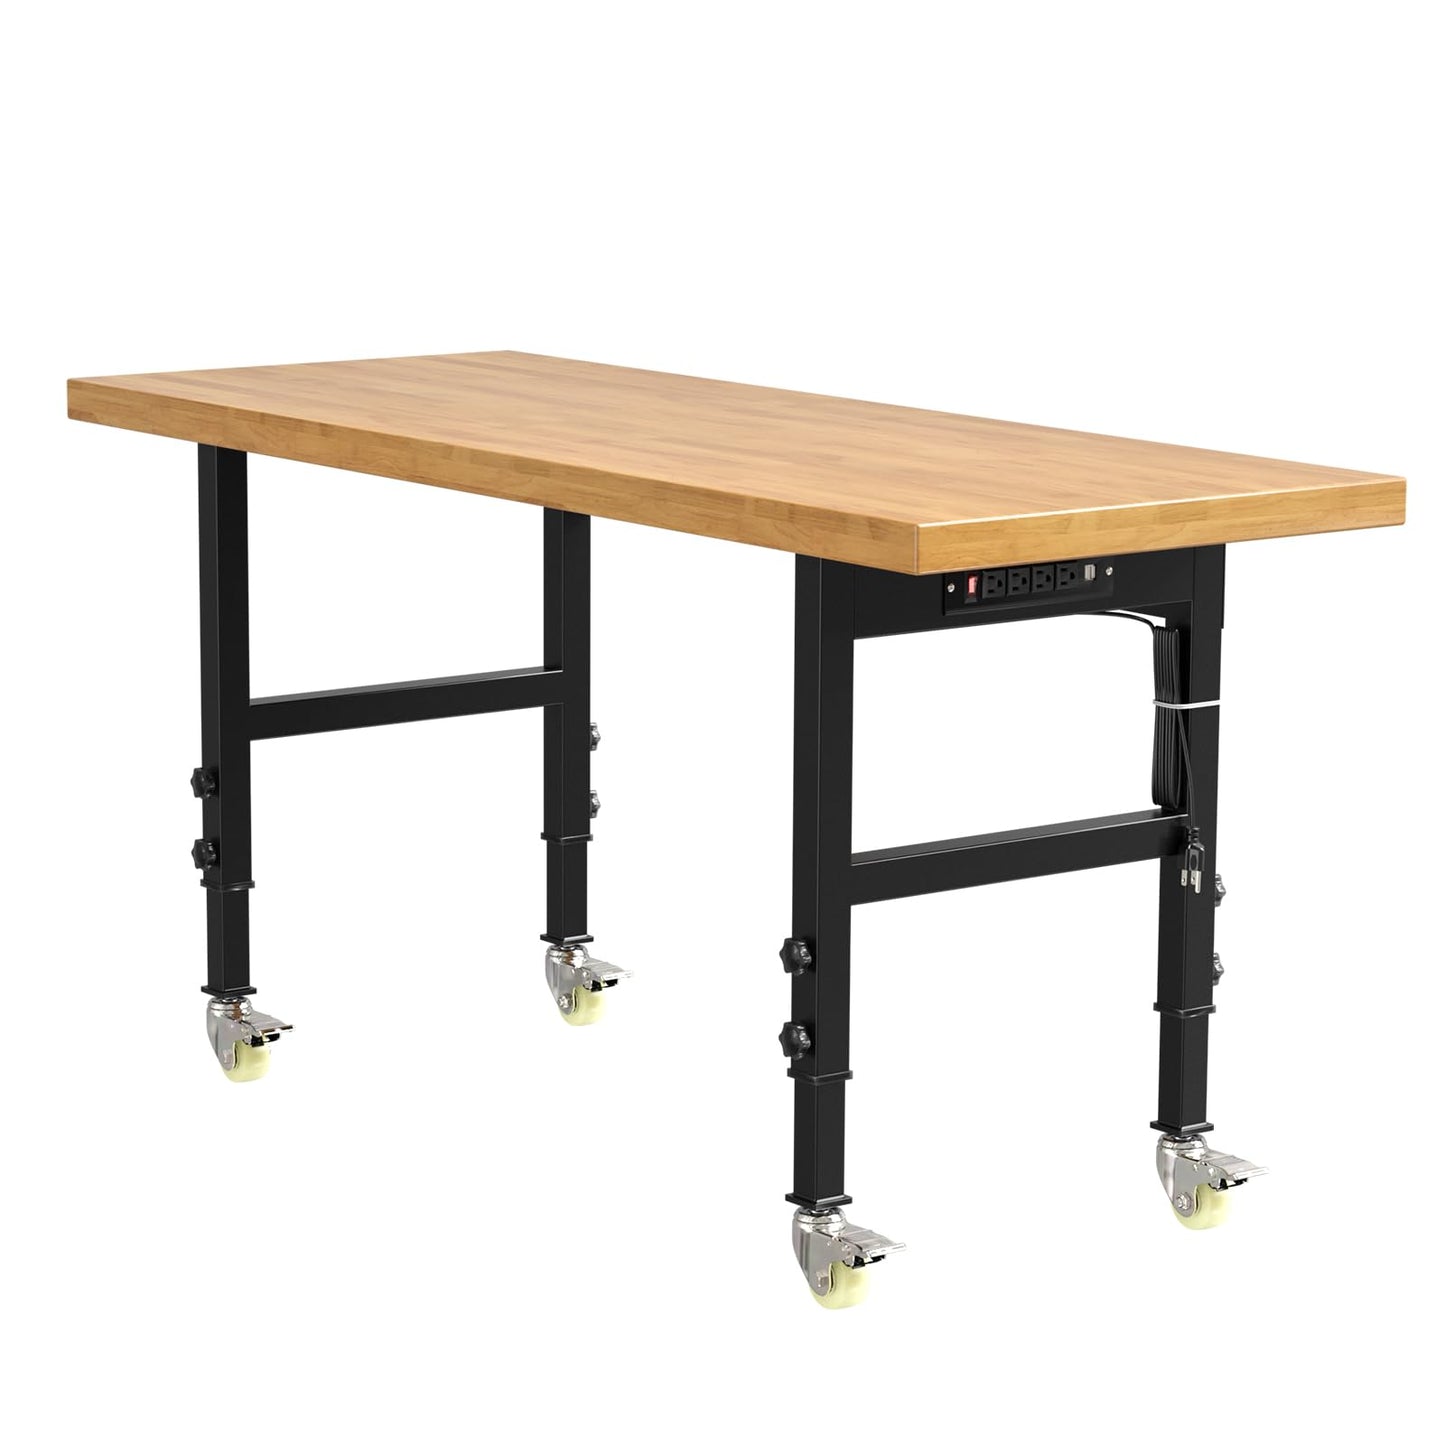 60” Heavy-Duty Solid Wood Work Bench Work Table with Wheels, Adjustable Height Portable Workbench with Power Outlets, 3000 Lbs Capacity Workstation